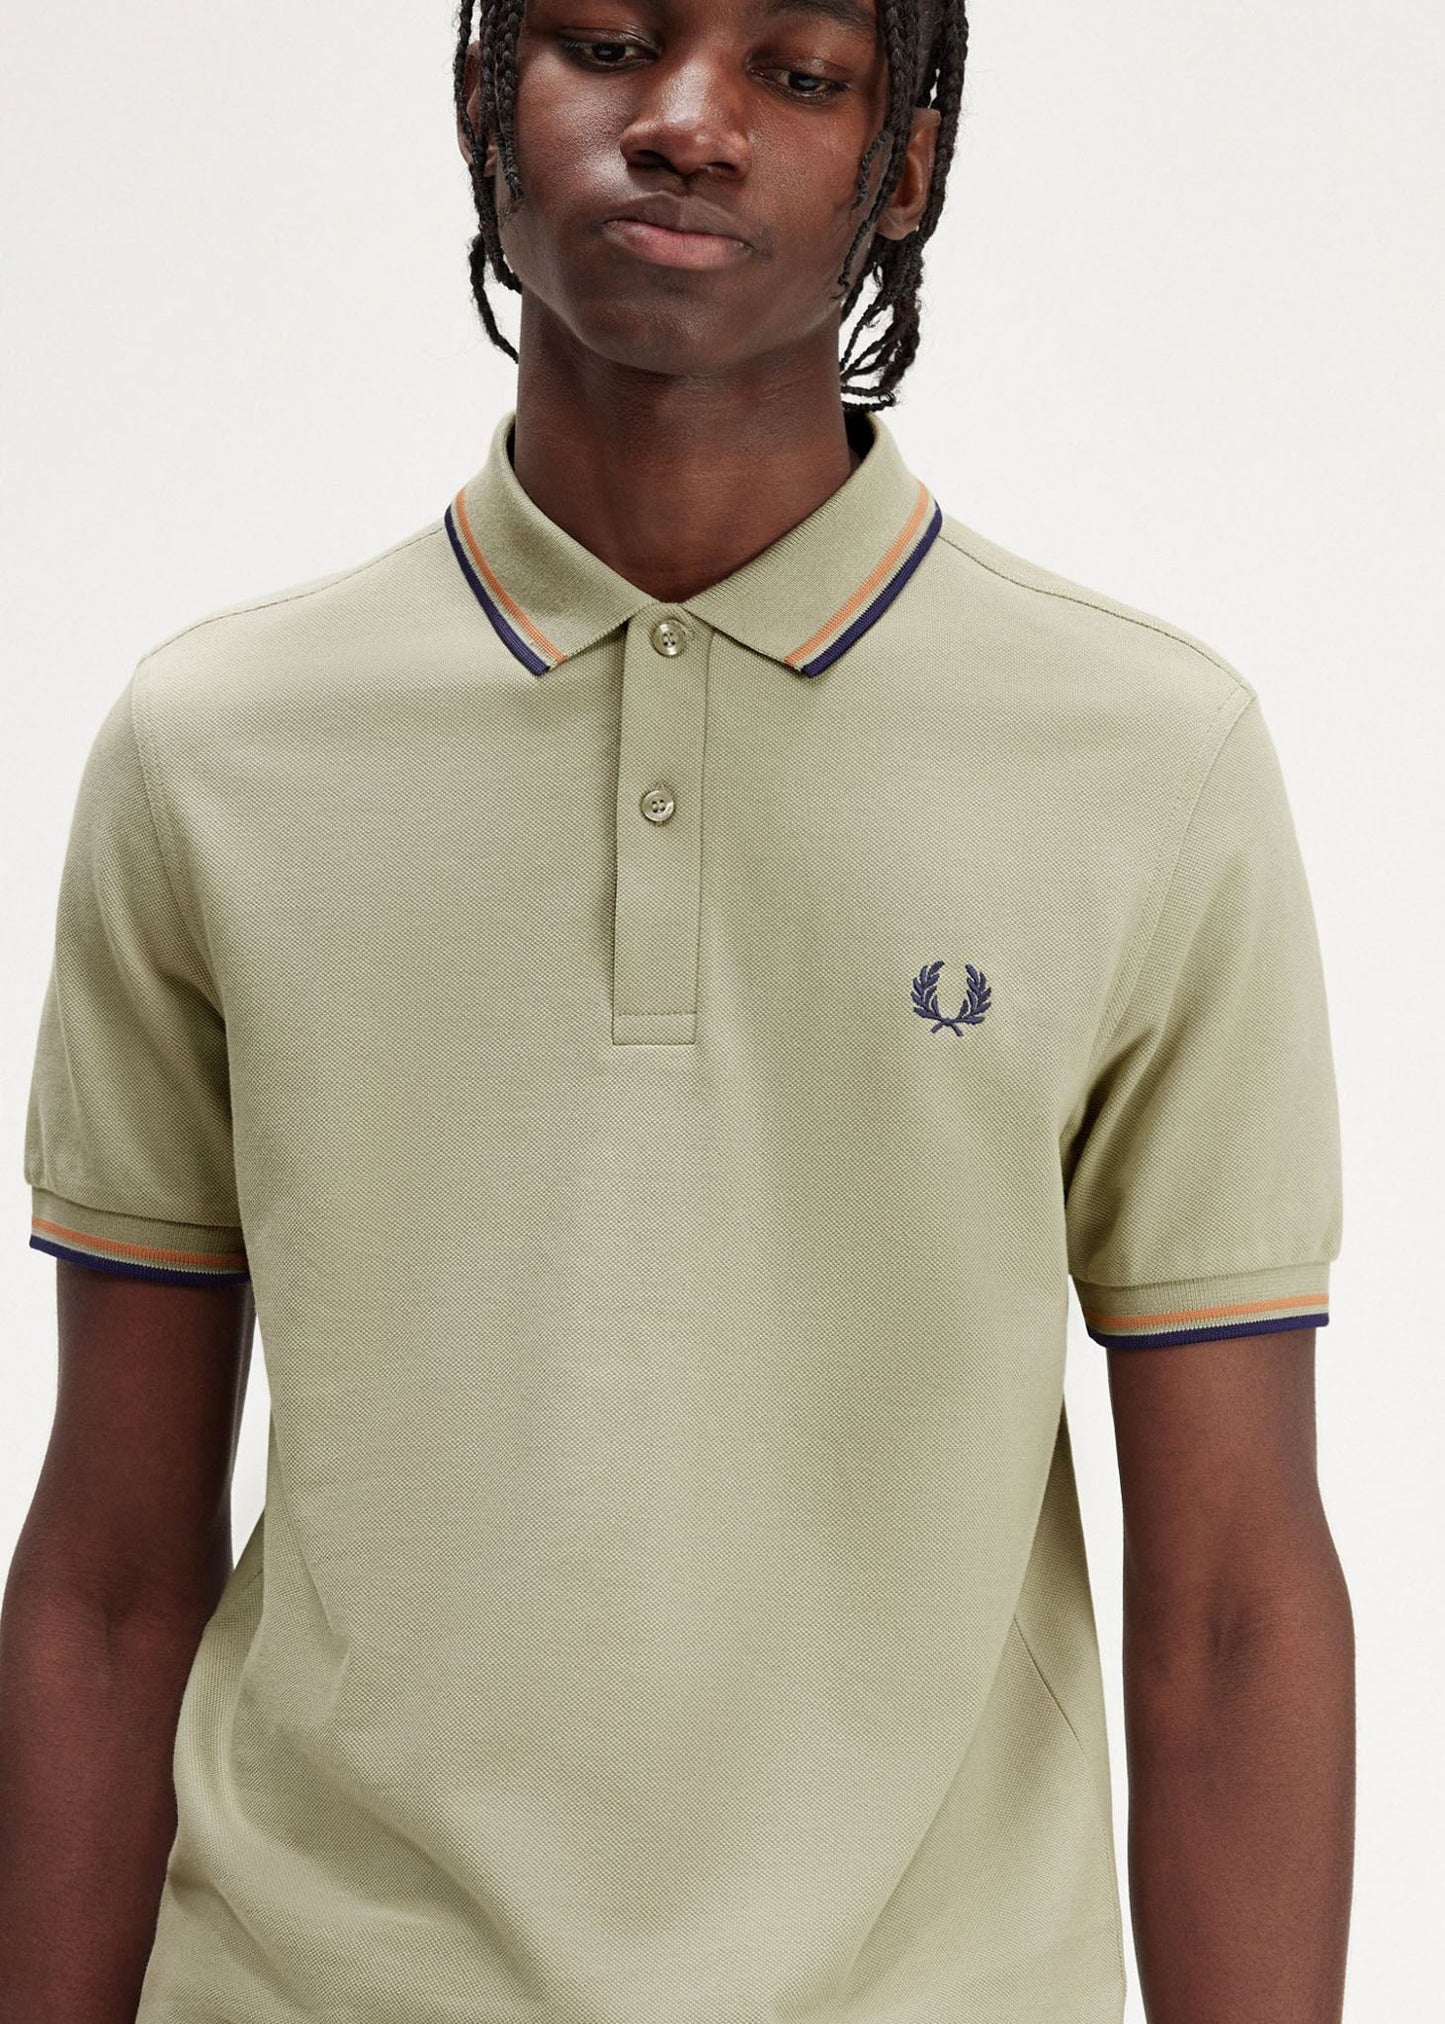 Twin tipped fred perry shirt - seagrass light rust french navy